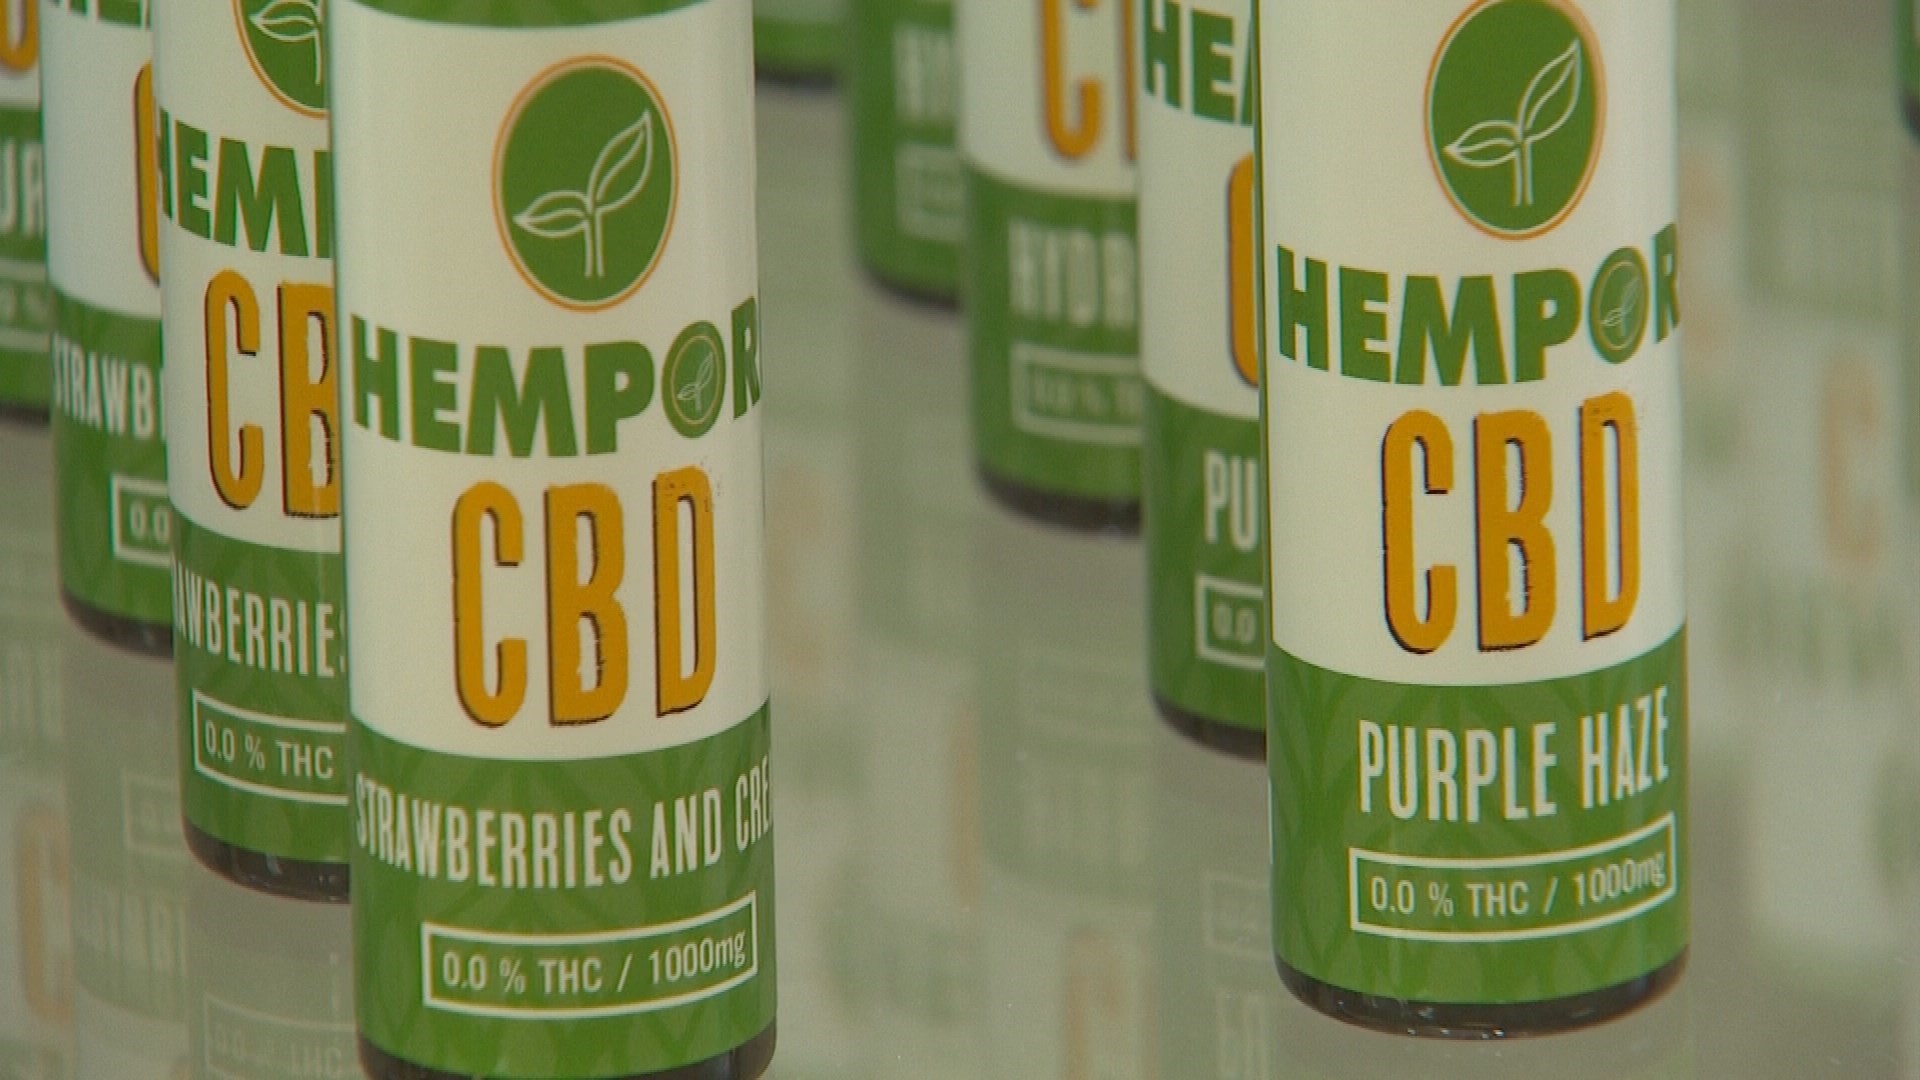 Chris Rogers reports to find out if using CBD oil could cause you to fail a drug test.